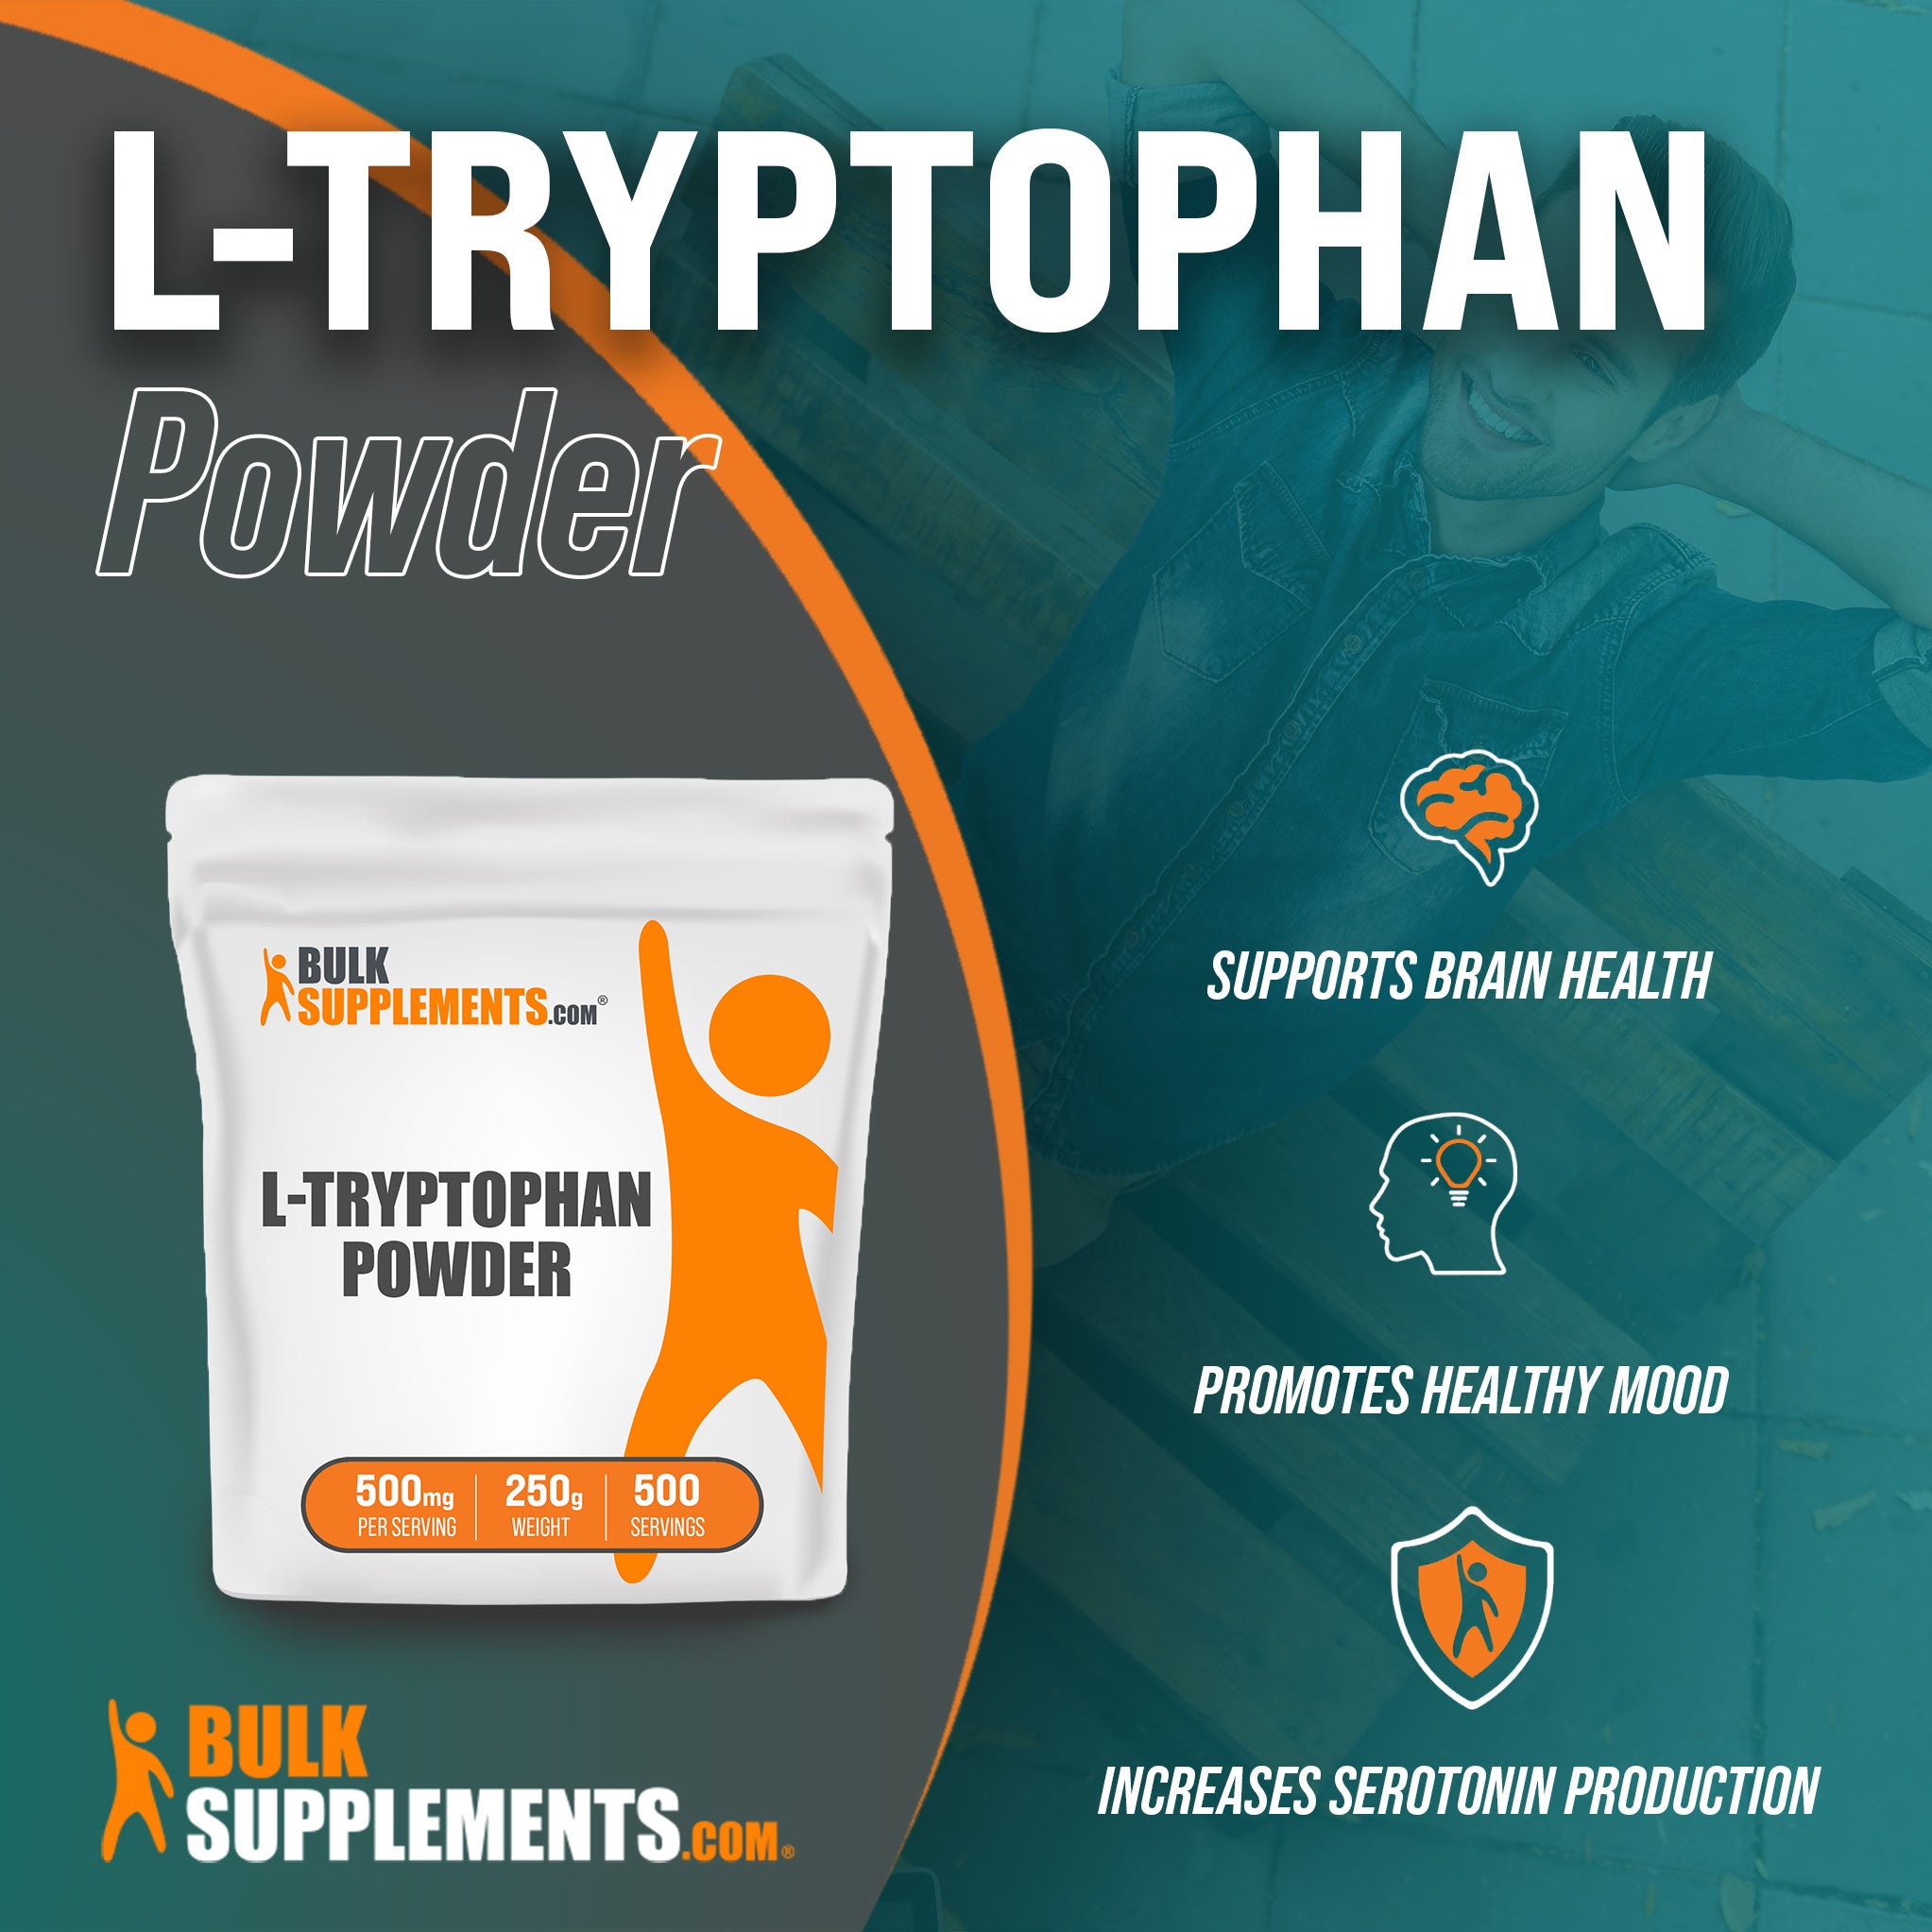 Benefits of L-Tryptophan: supports brain health, promotes healthy mood, increases serotonin production